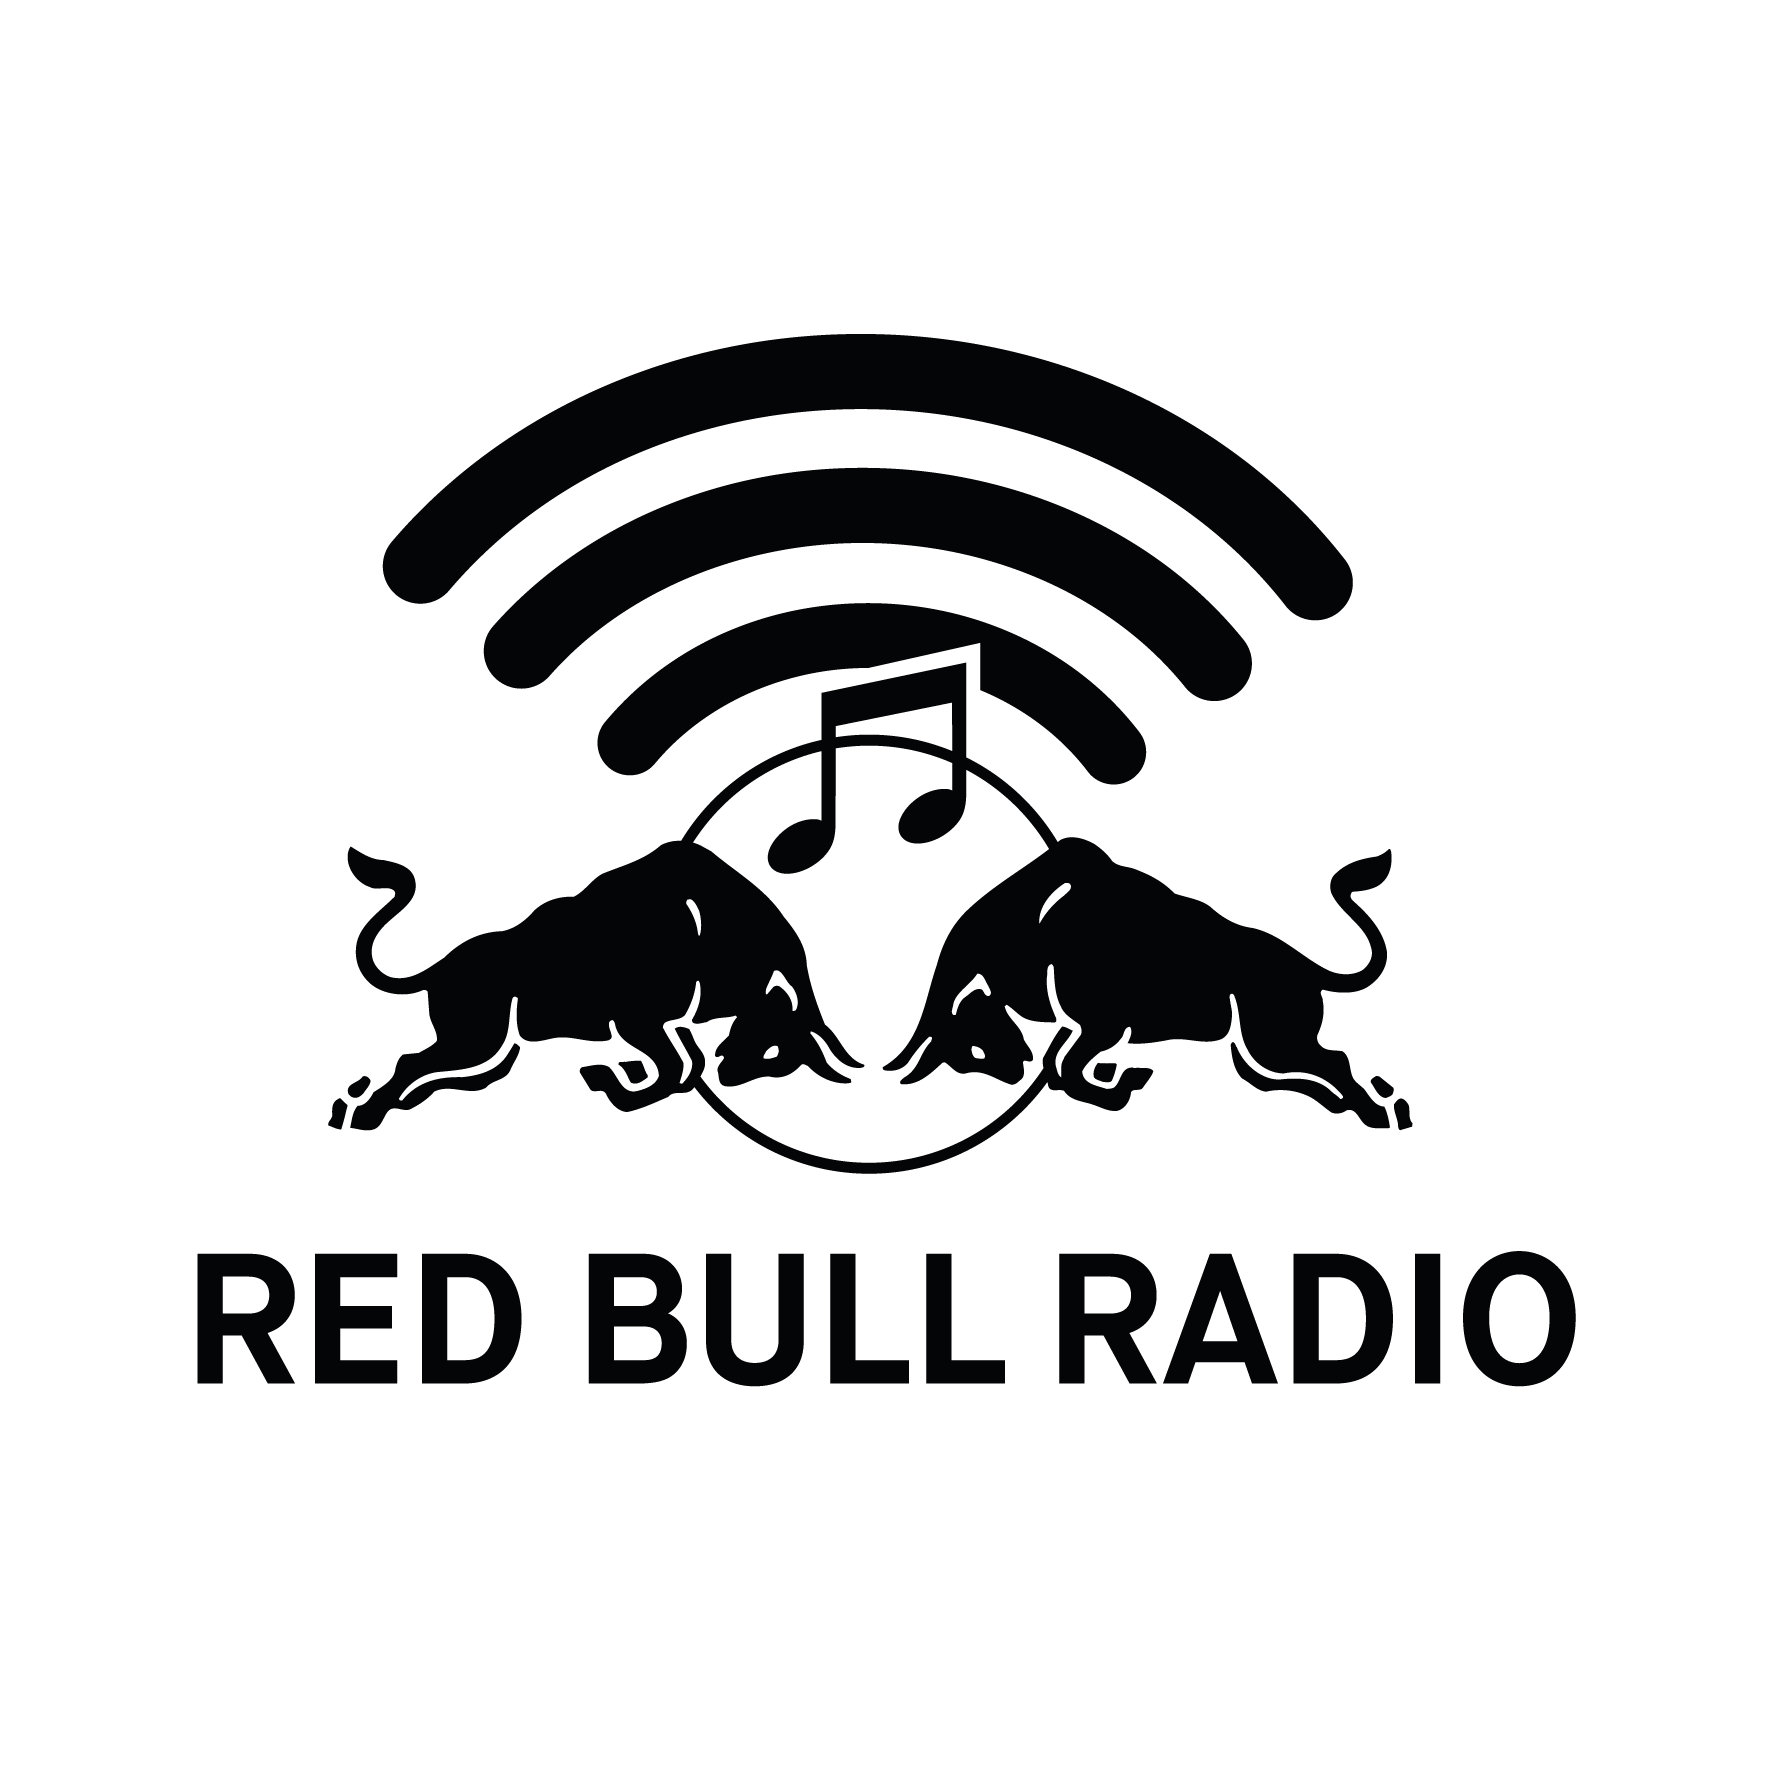 Black White and Red Bull Logo - Energy Drink - Red Bull Products & Company :: Energy Drink :: Red Bull